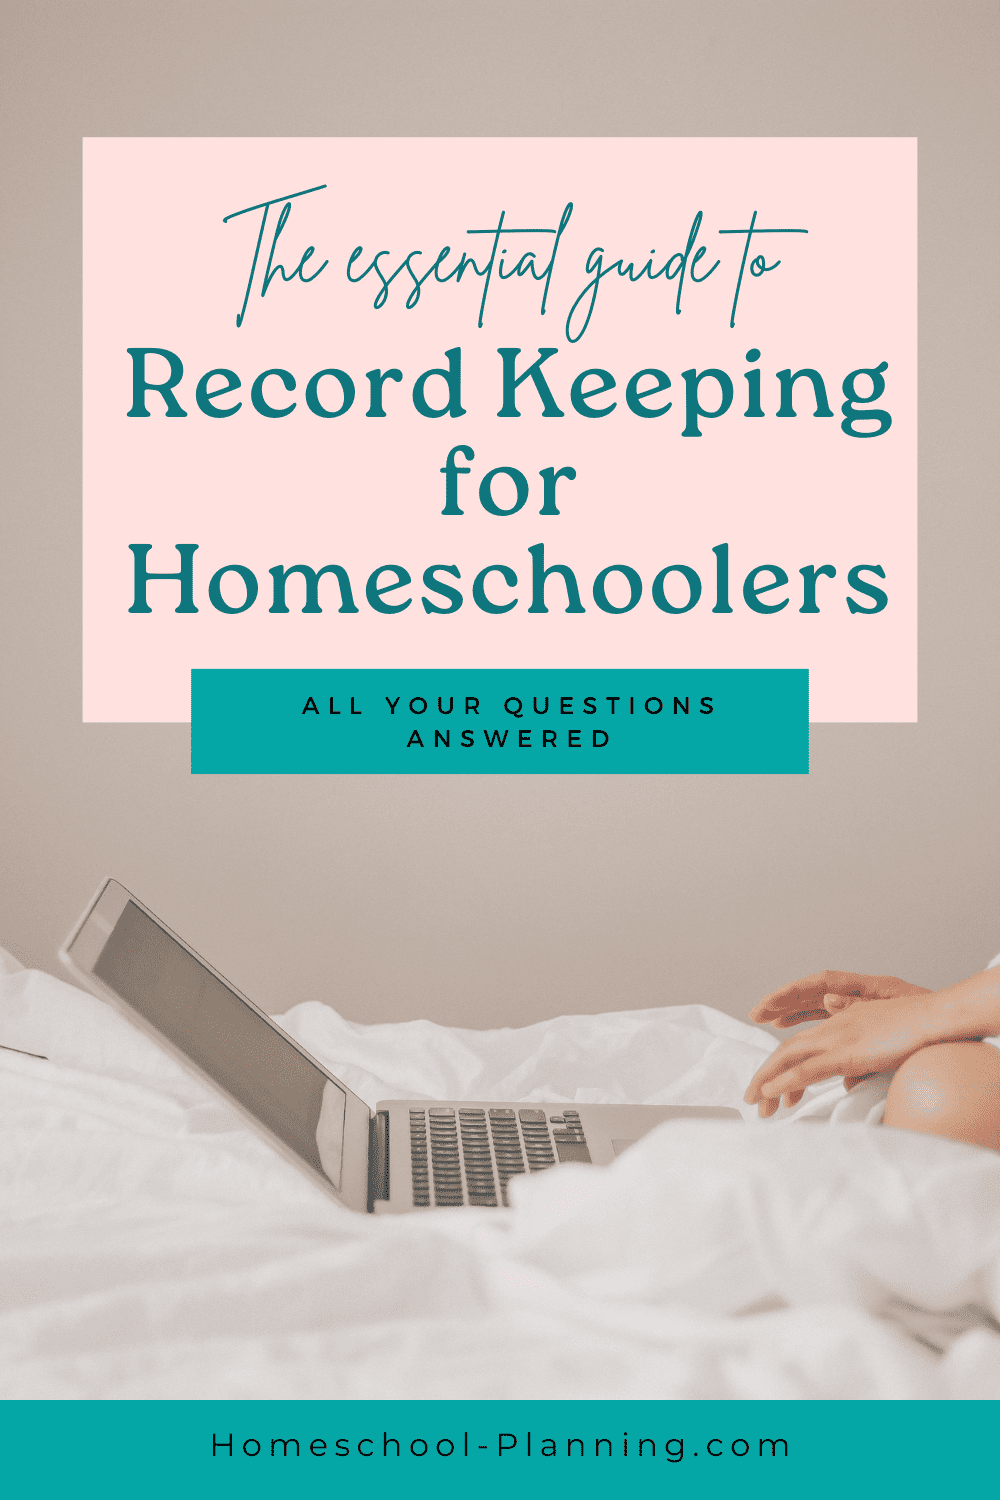 THe essential guide to record keeping for homeschoolers pin image with computer on a bed